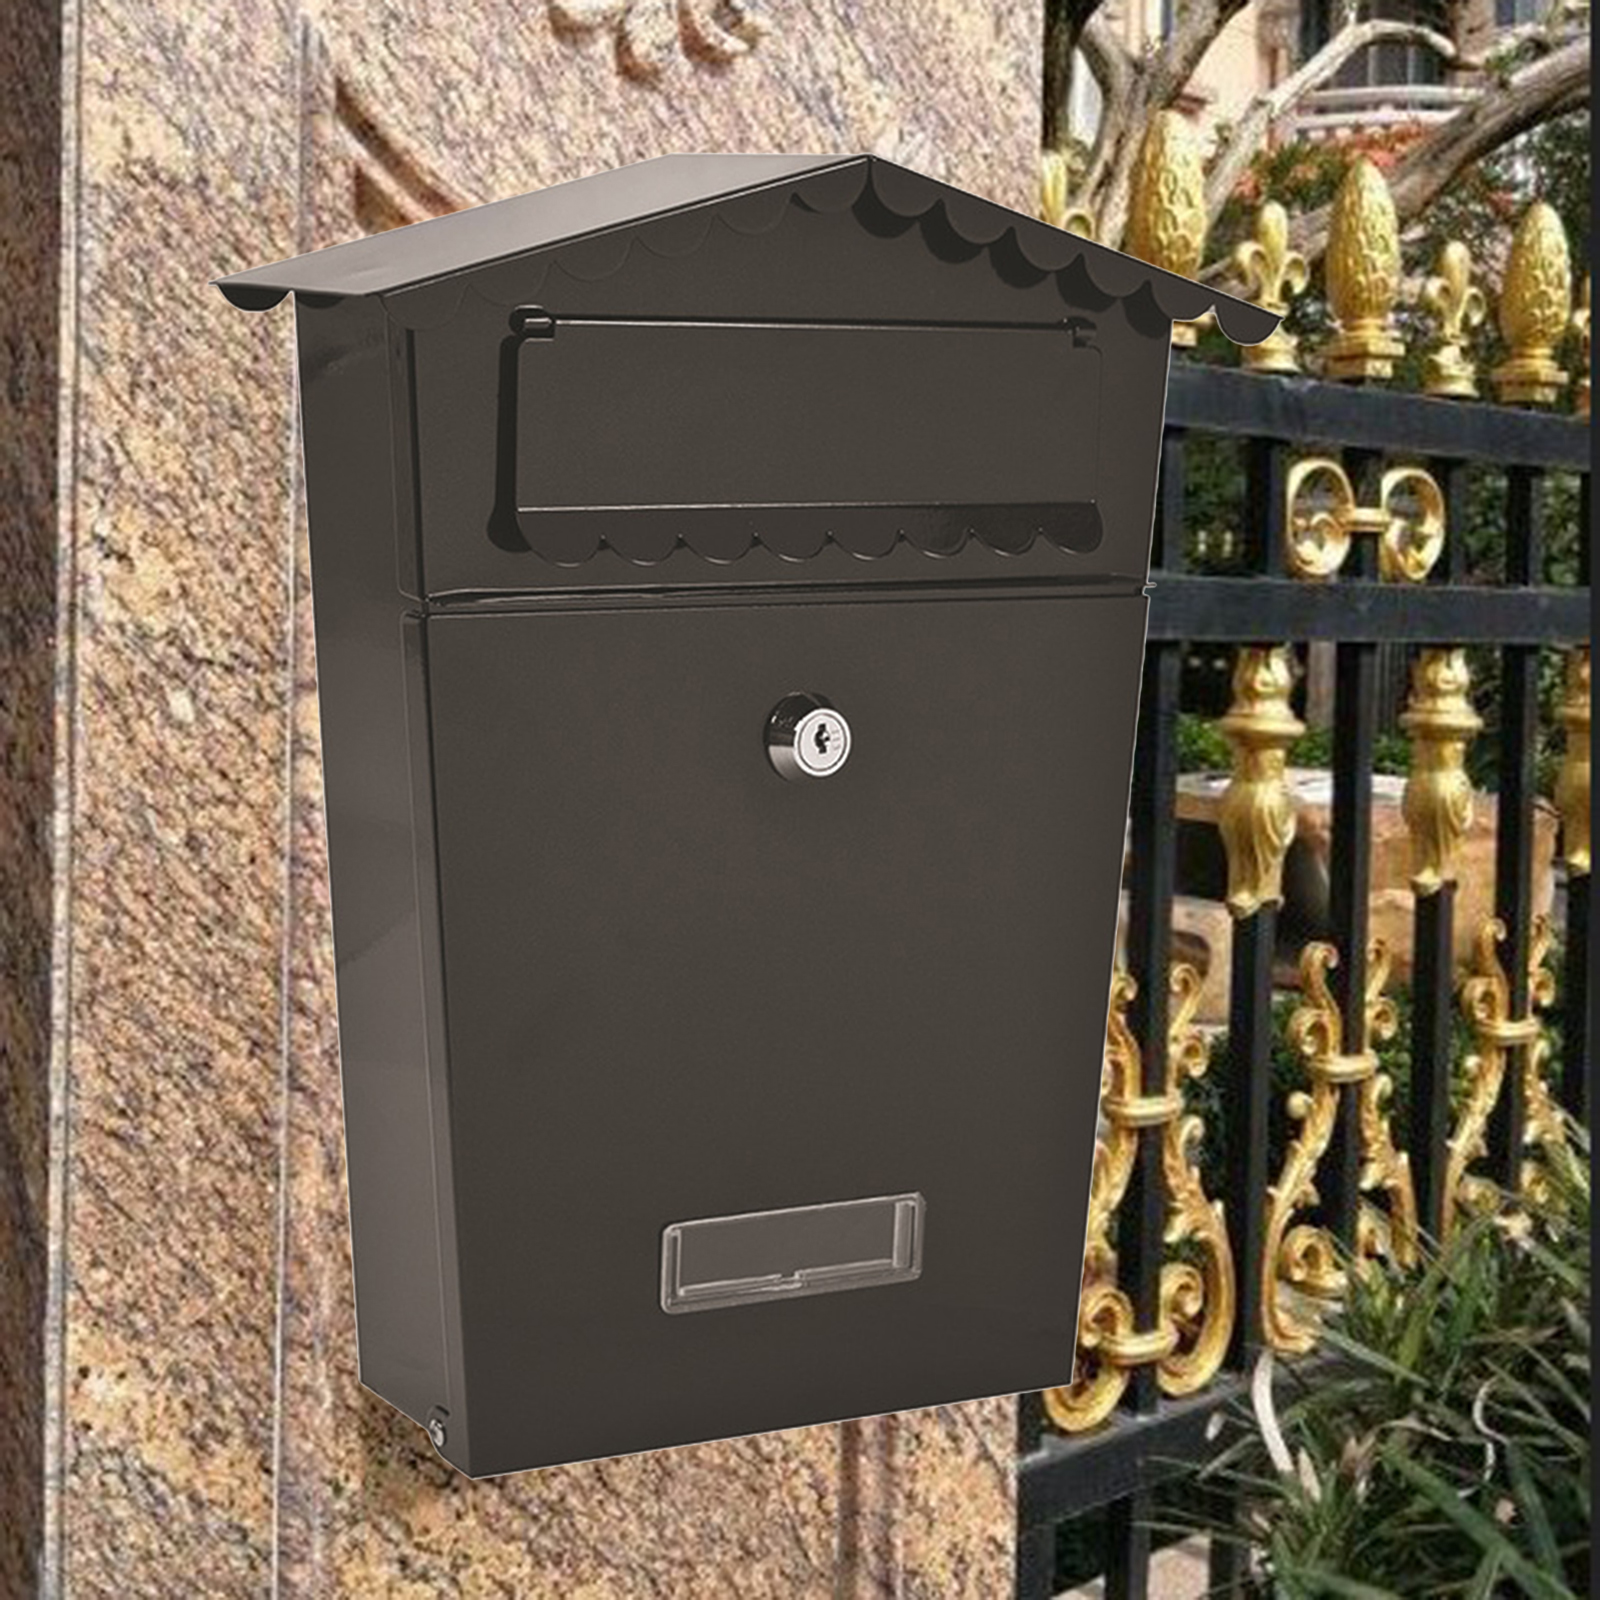 Wall Mounted Letterbox Mailbox Postbox Parcel Drop Box Outdoor Outside Large Front Door Waterproof Lockable Safe Secure Mail Post Letter Box-Black